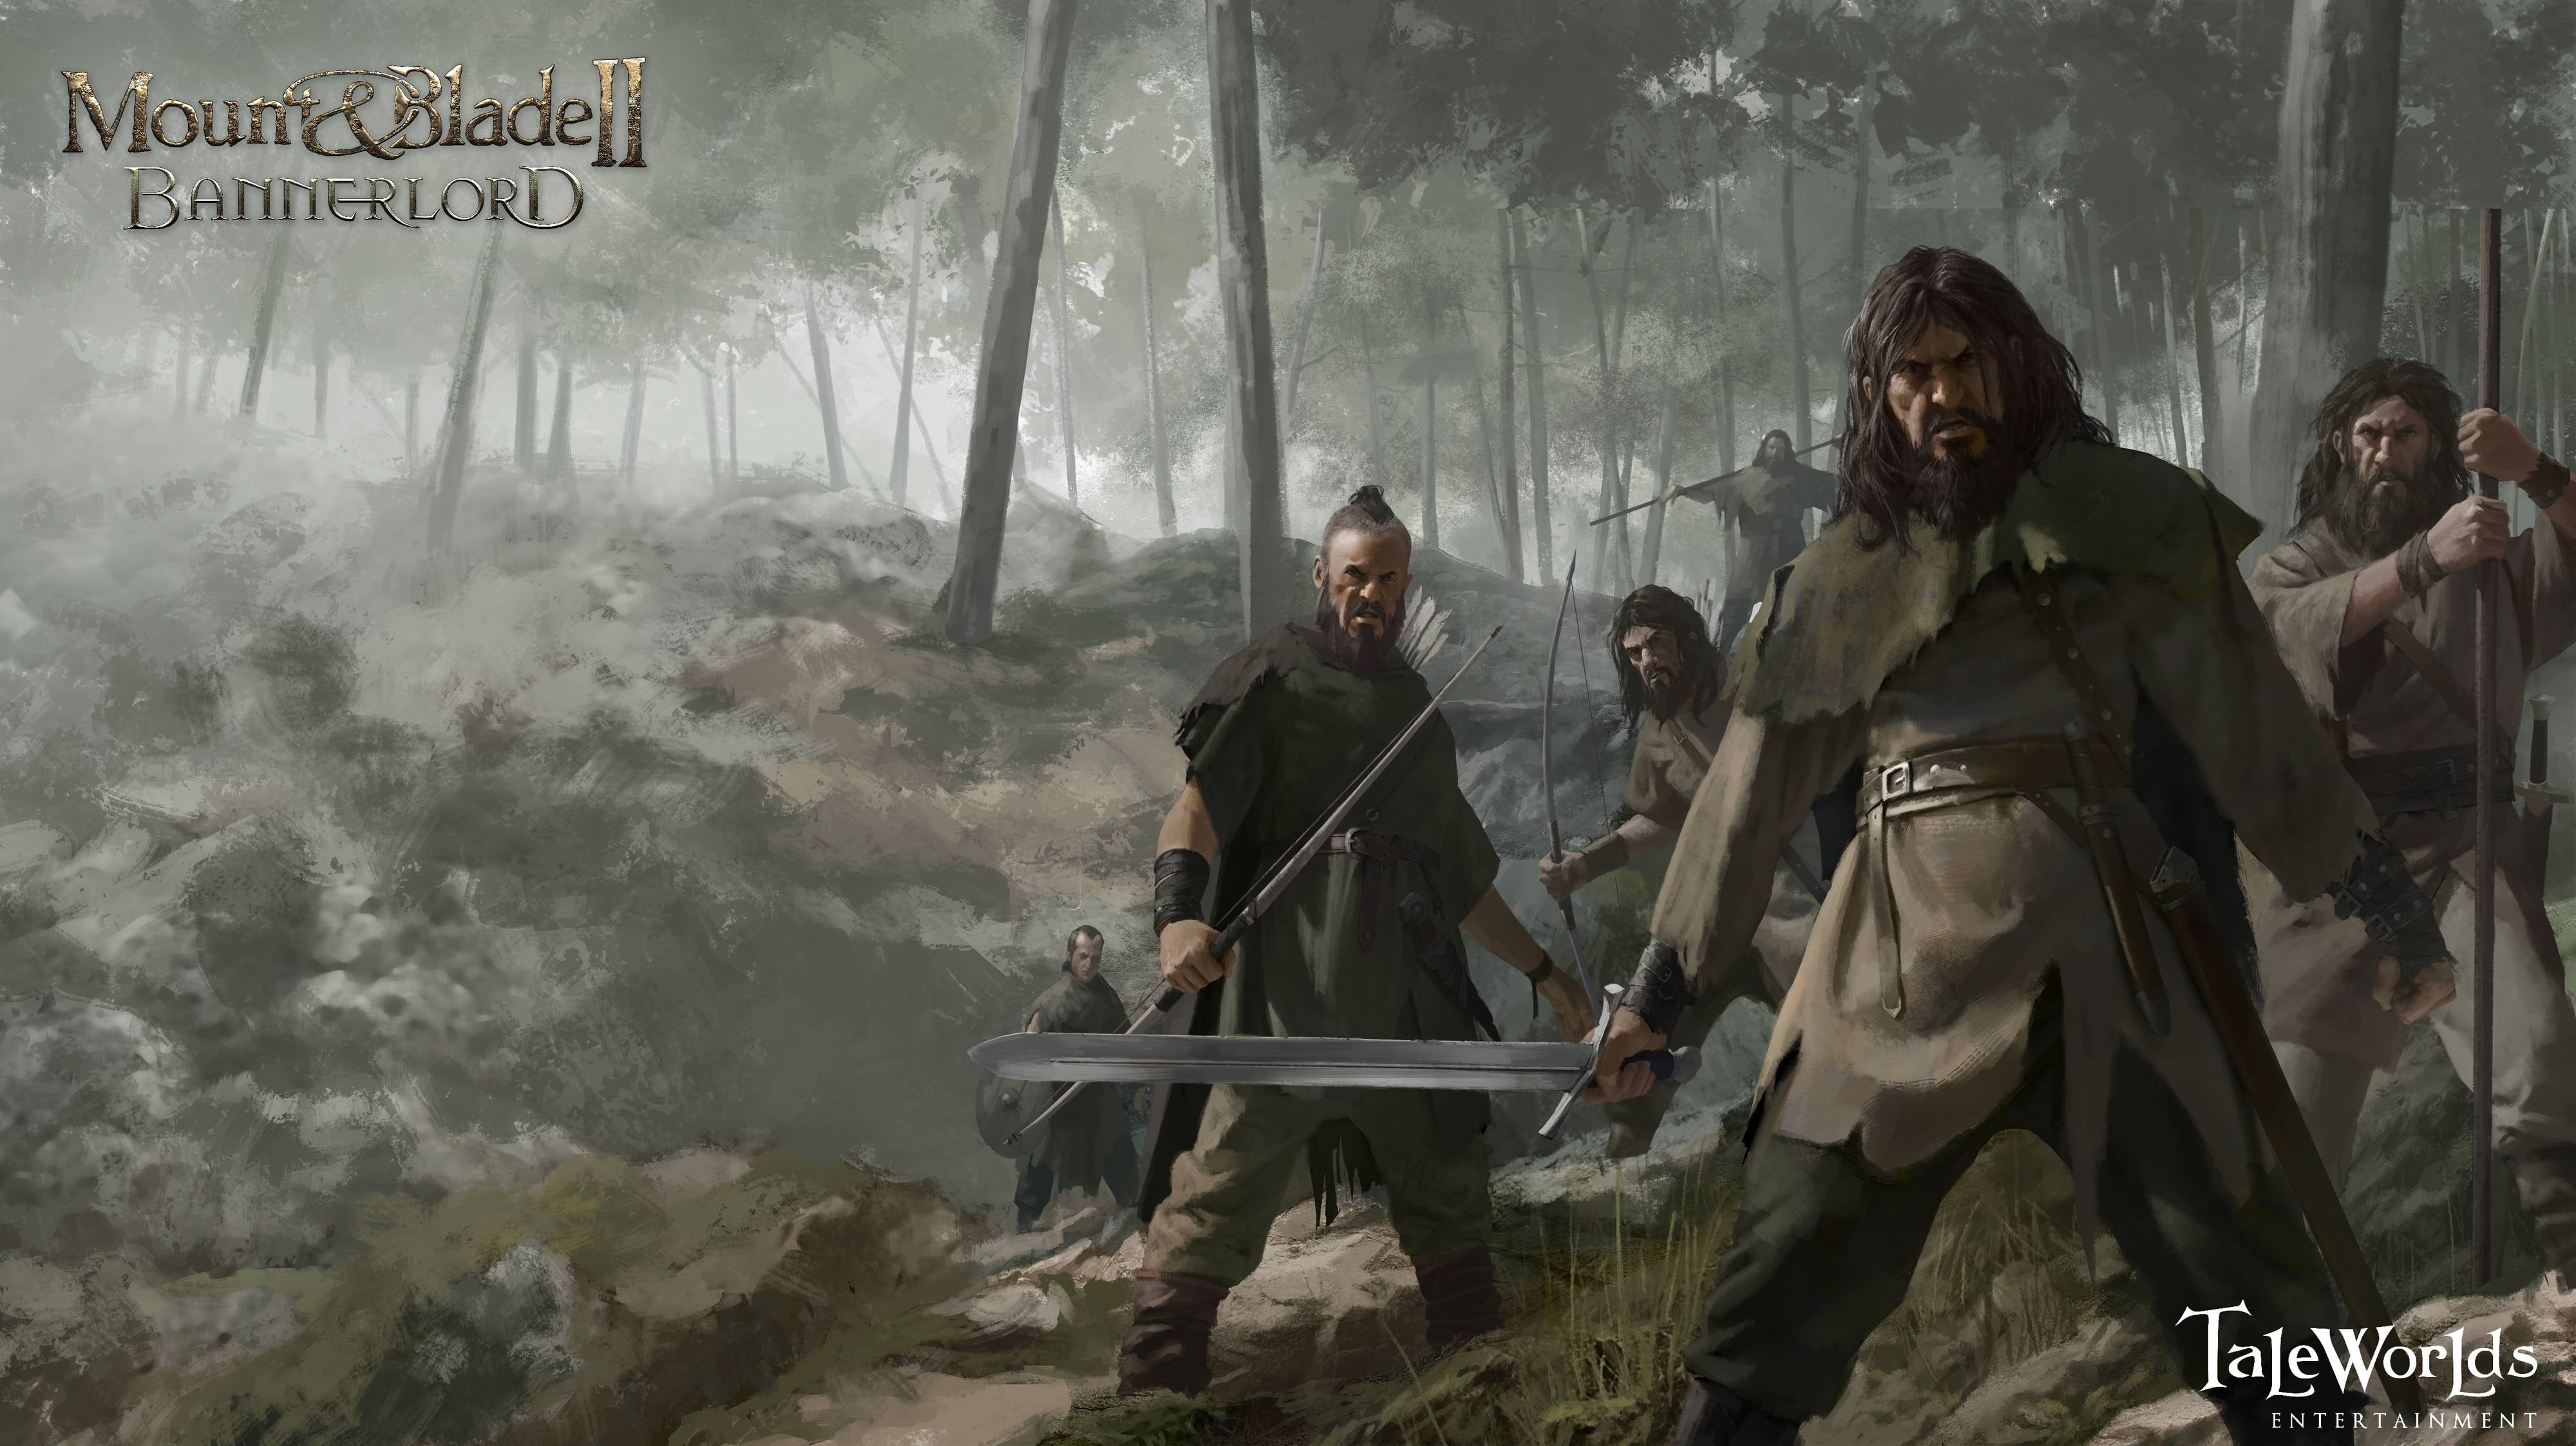 Mount Blade II wallpaper, art, robbers, Mount and Blade 2: Bannerlord